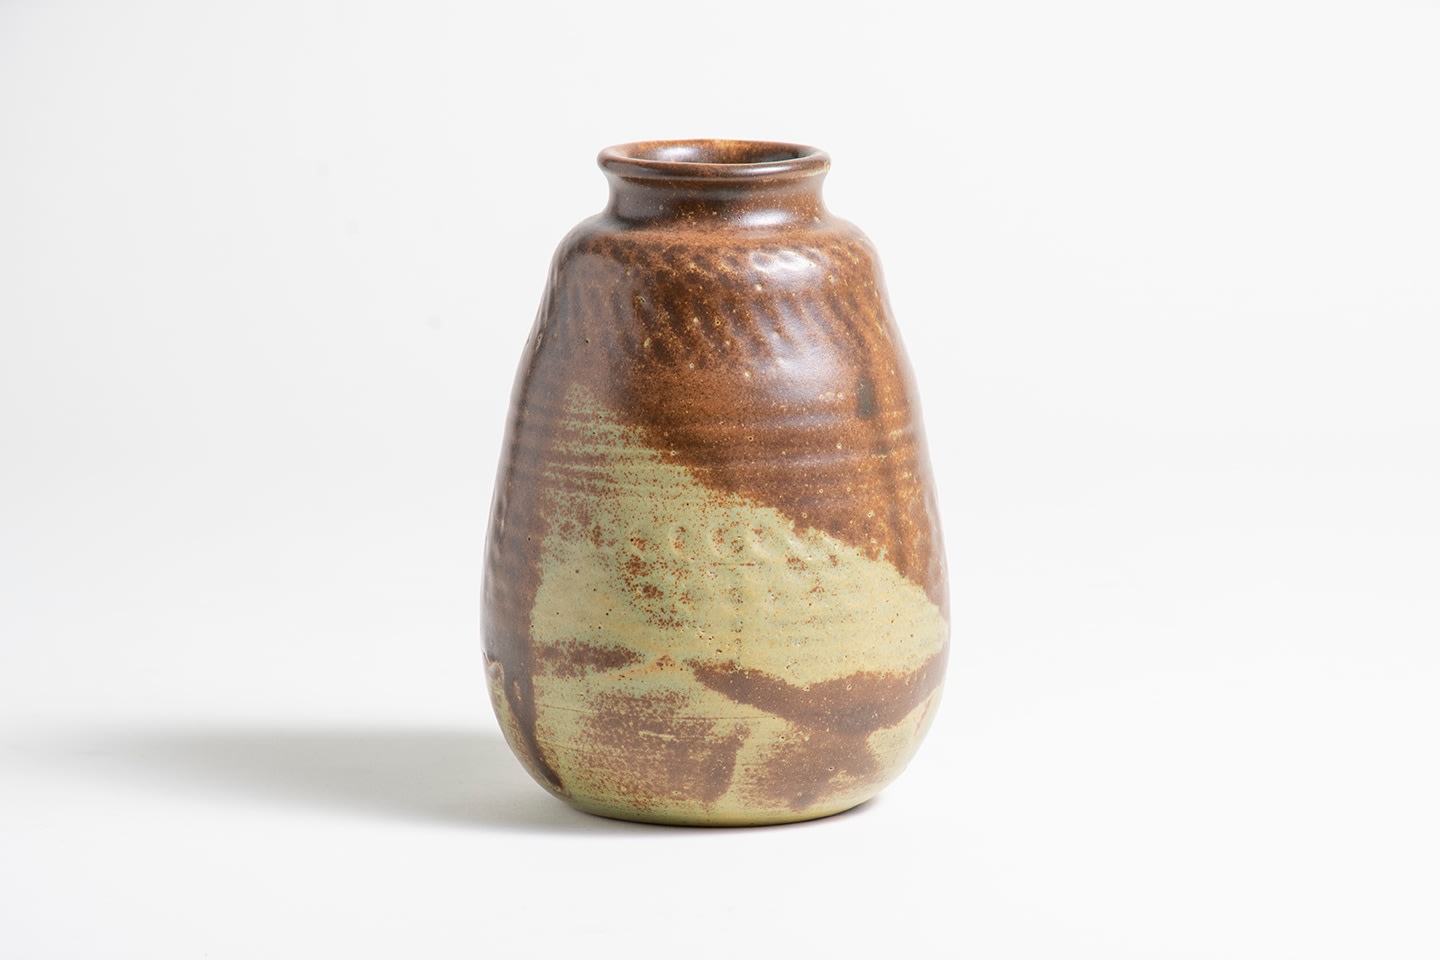 a vase glazed in tan and medium brown, the body with horizontal rows of impressed geometric design including vertical, horizontal, diagonal lines and circular impressions